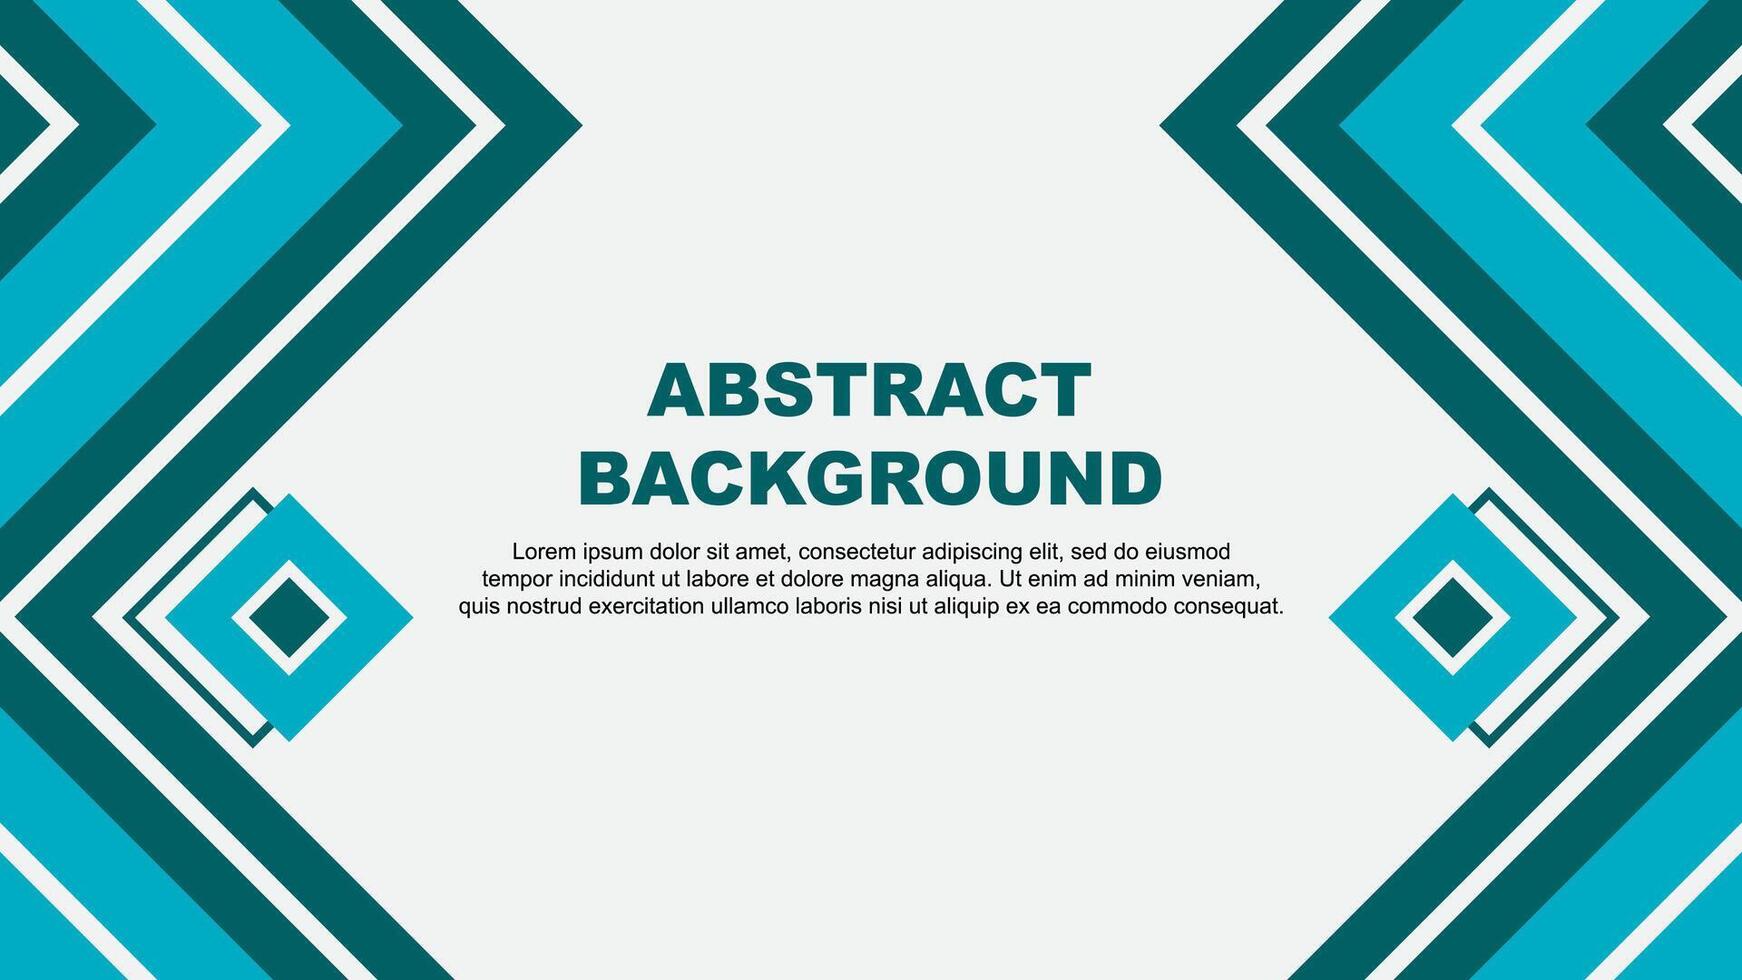 Abstract Teal Background Design Template. Abstract Banner Wallpaper Illustration. Teal Design vector